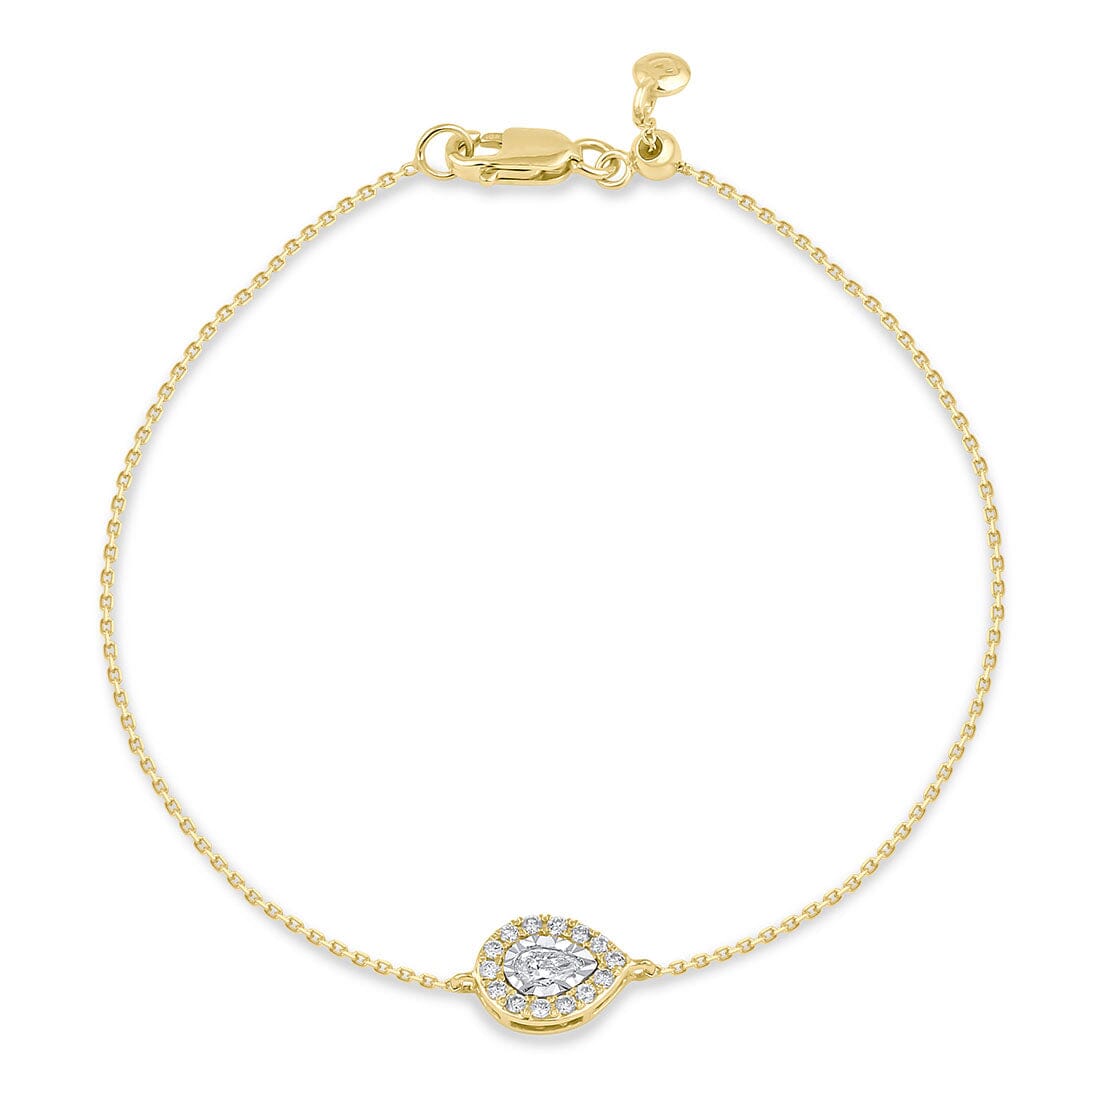 Meera Pear Halo Bracelet with 0.20ct of Laboratory Grown Diamonds in 9ct Yellow Gold Bracelets Bevilles 